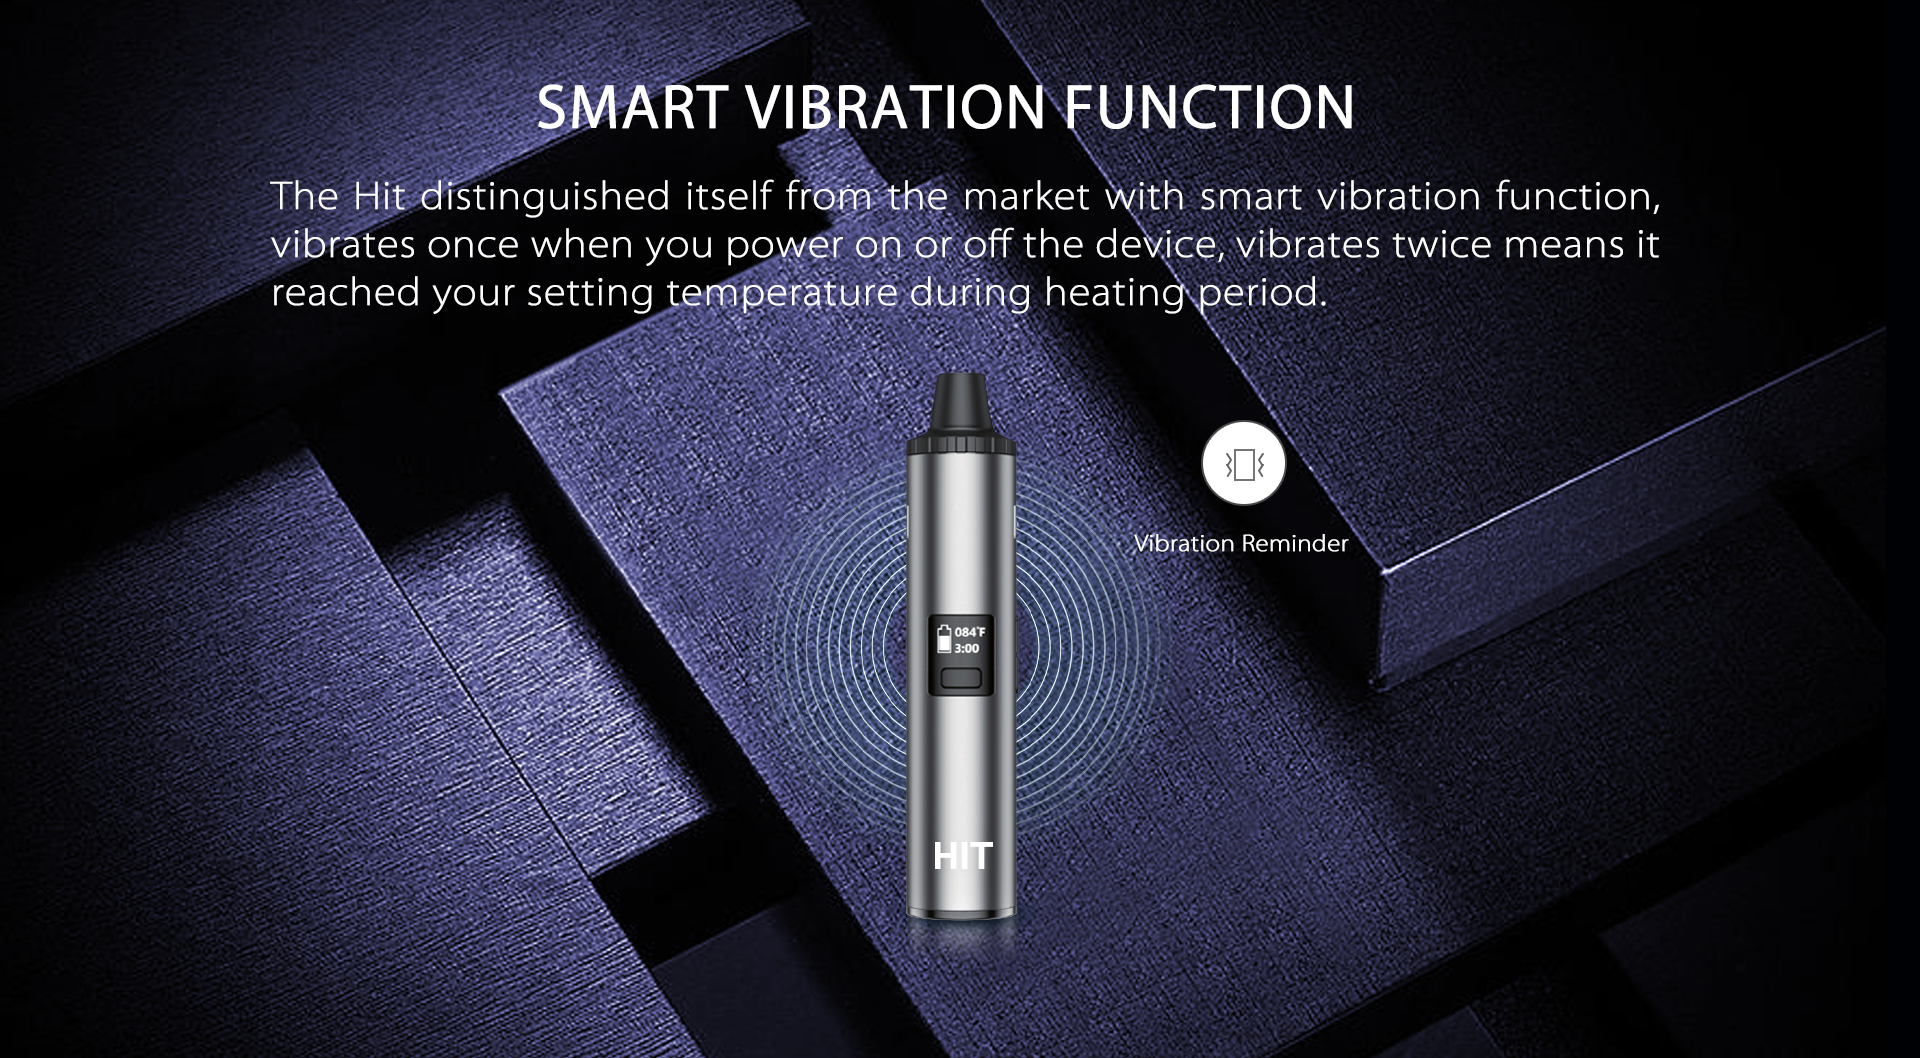 Yocan Hit Vaporizer Pen distinguished itself from the market with smart vibration function.